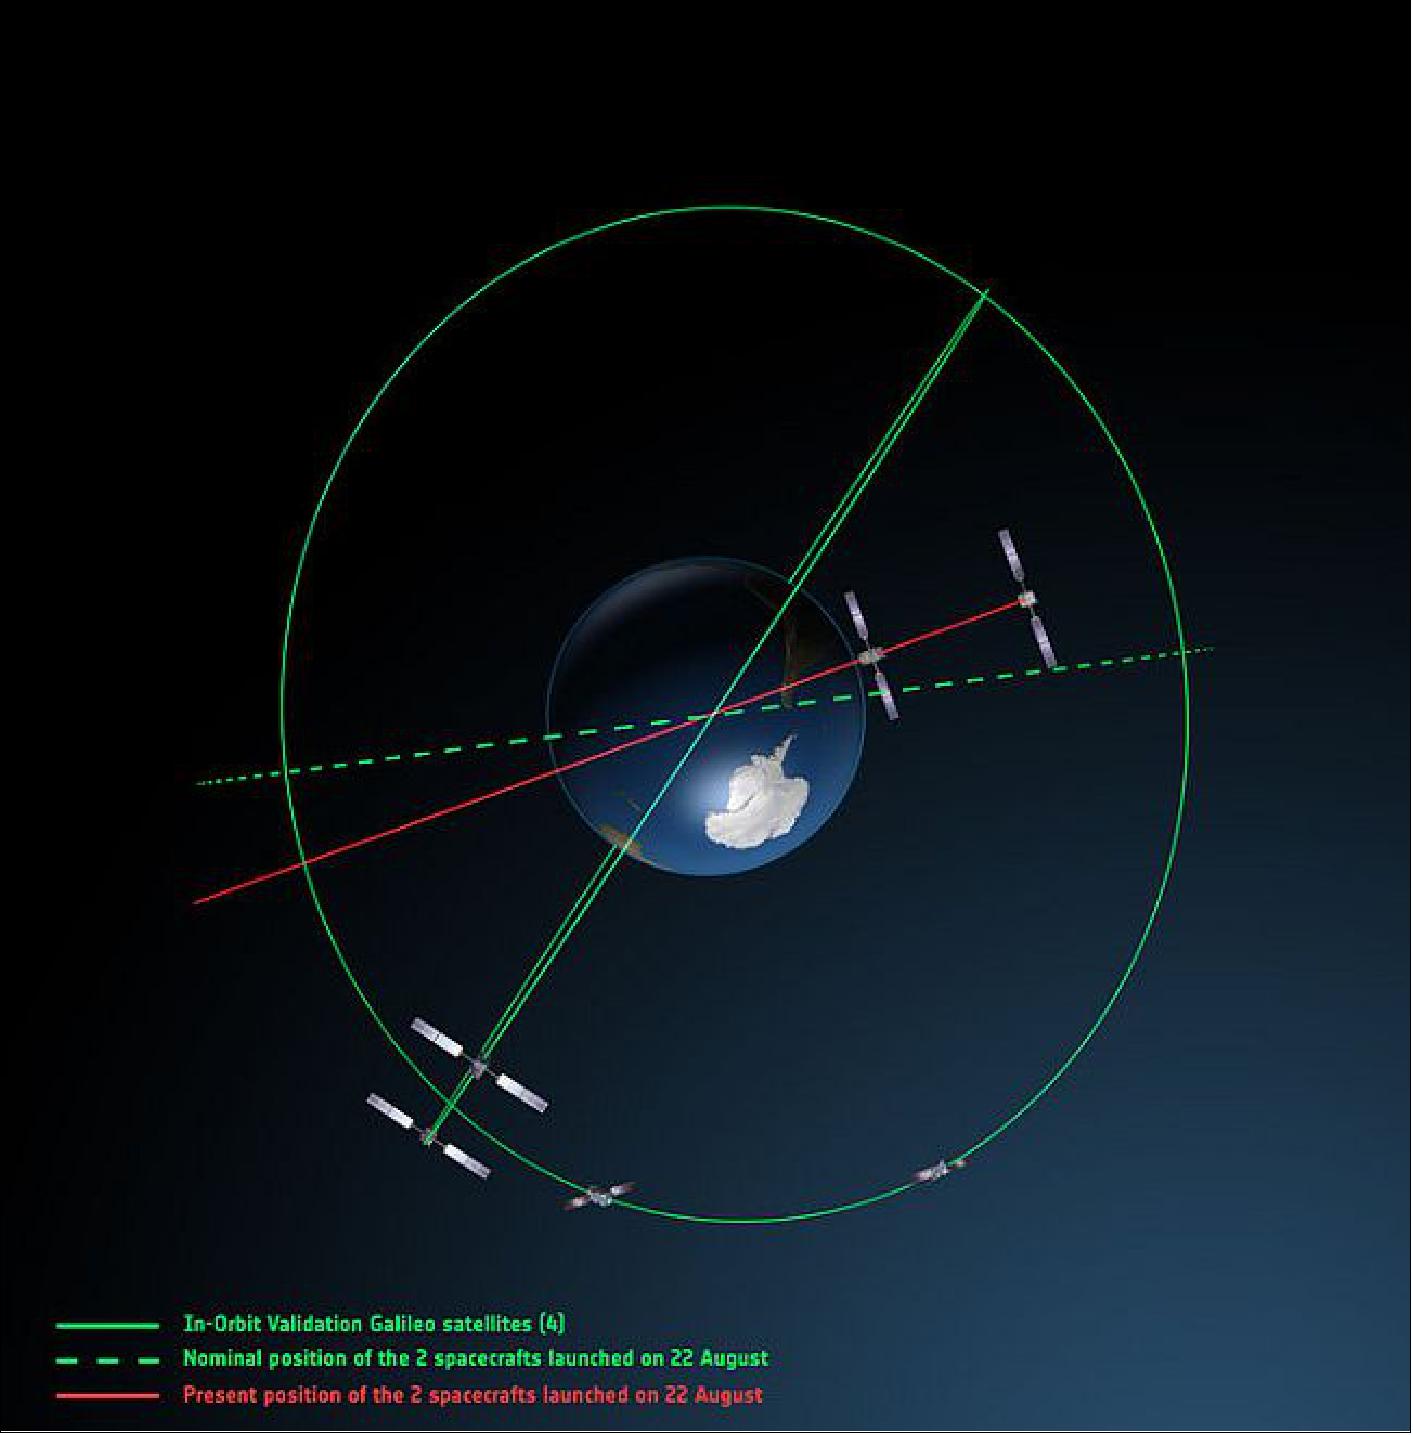 Figure 87: “Galileo orbits viewed from above,” ESA, released on Sept. 16, 2014 108)